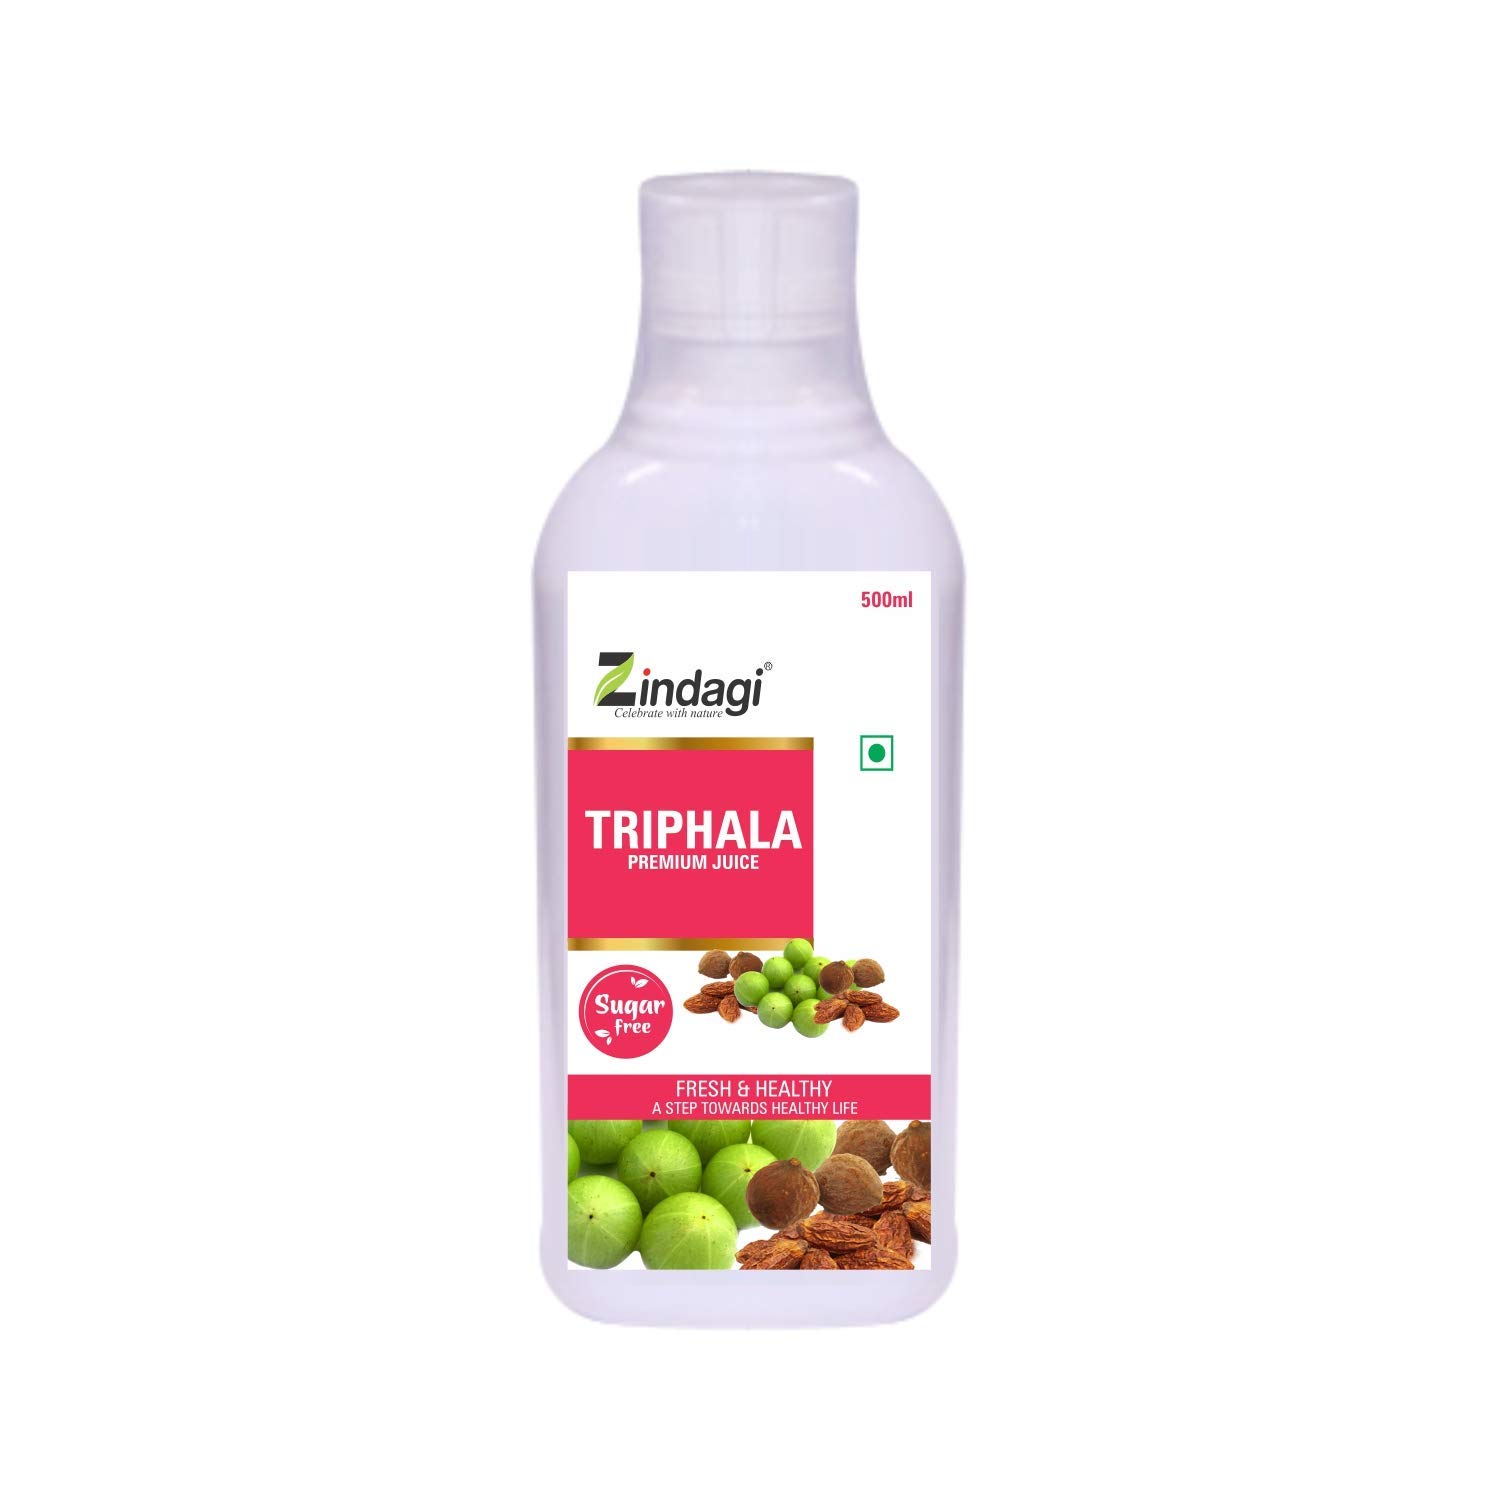 Buy Zindagi Pure Triphala Juice - Natural, Sugar-Free & Concentrate Triphala Liquid Extract (1000 ml) Pack of 2 at Best Price Online